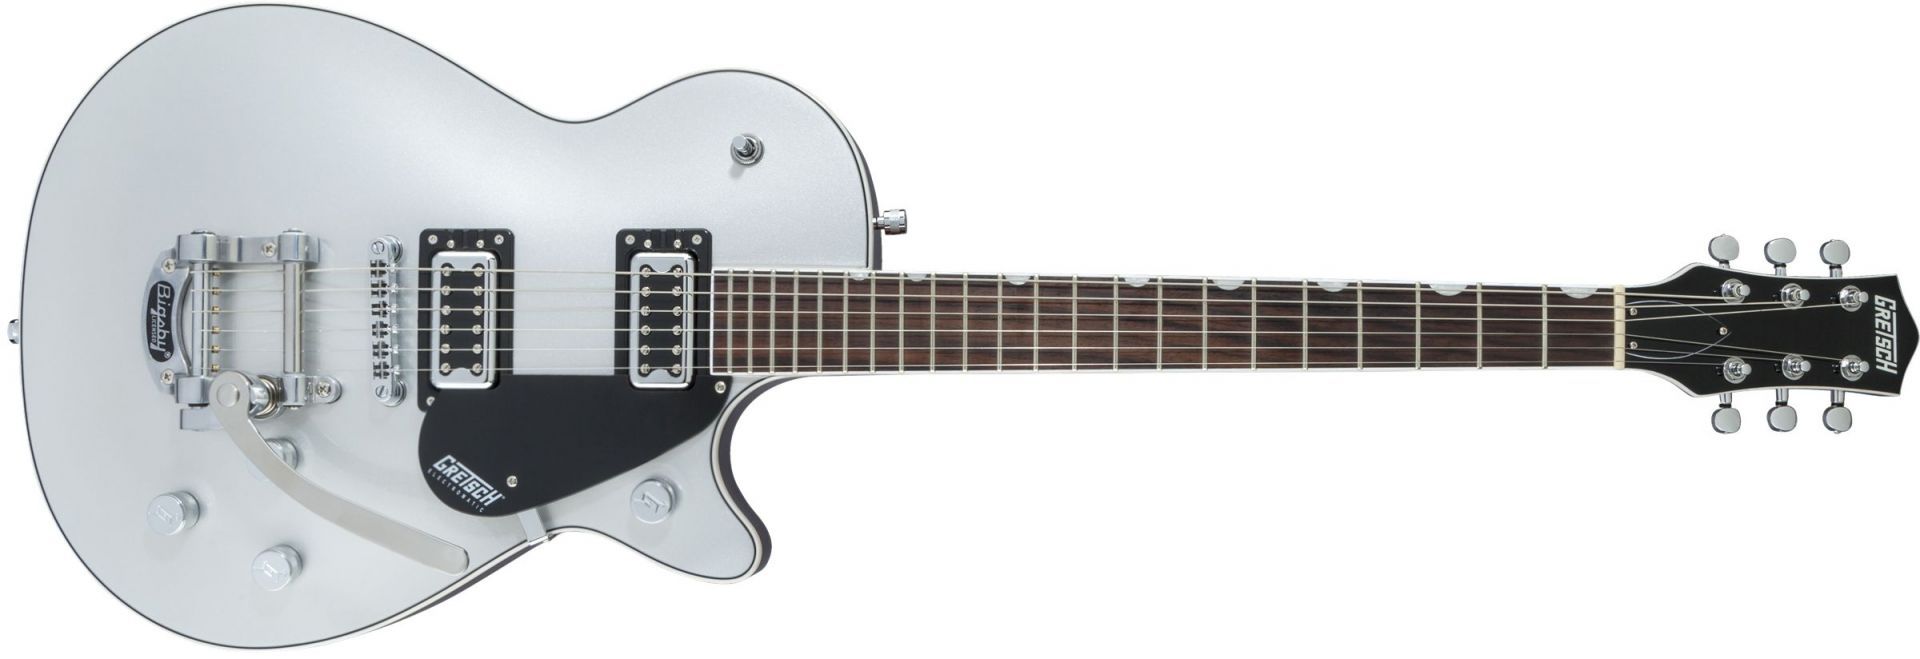 Gretsch Guitars G5230T Electromatic Jet FT Single-Cut with Bigsby Silver